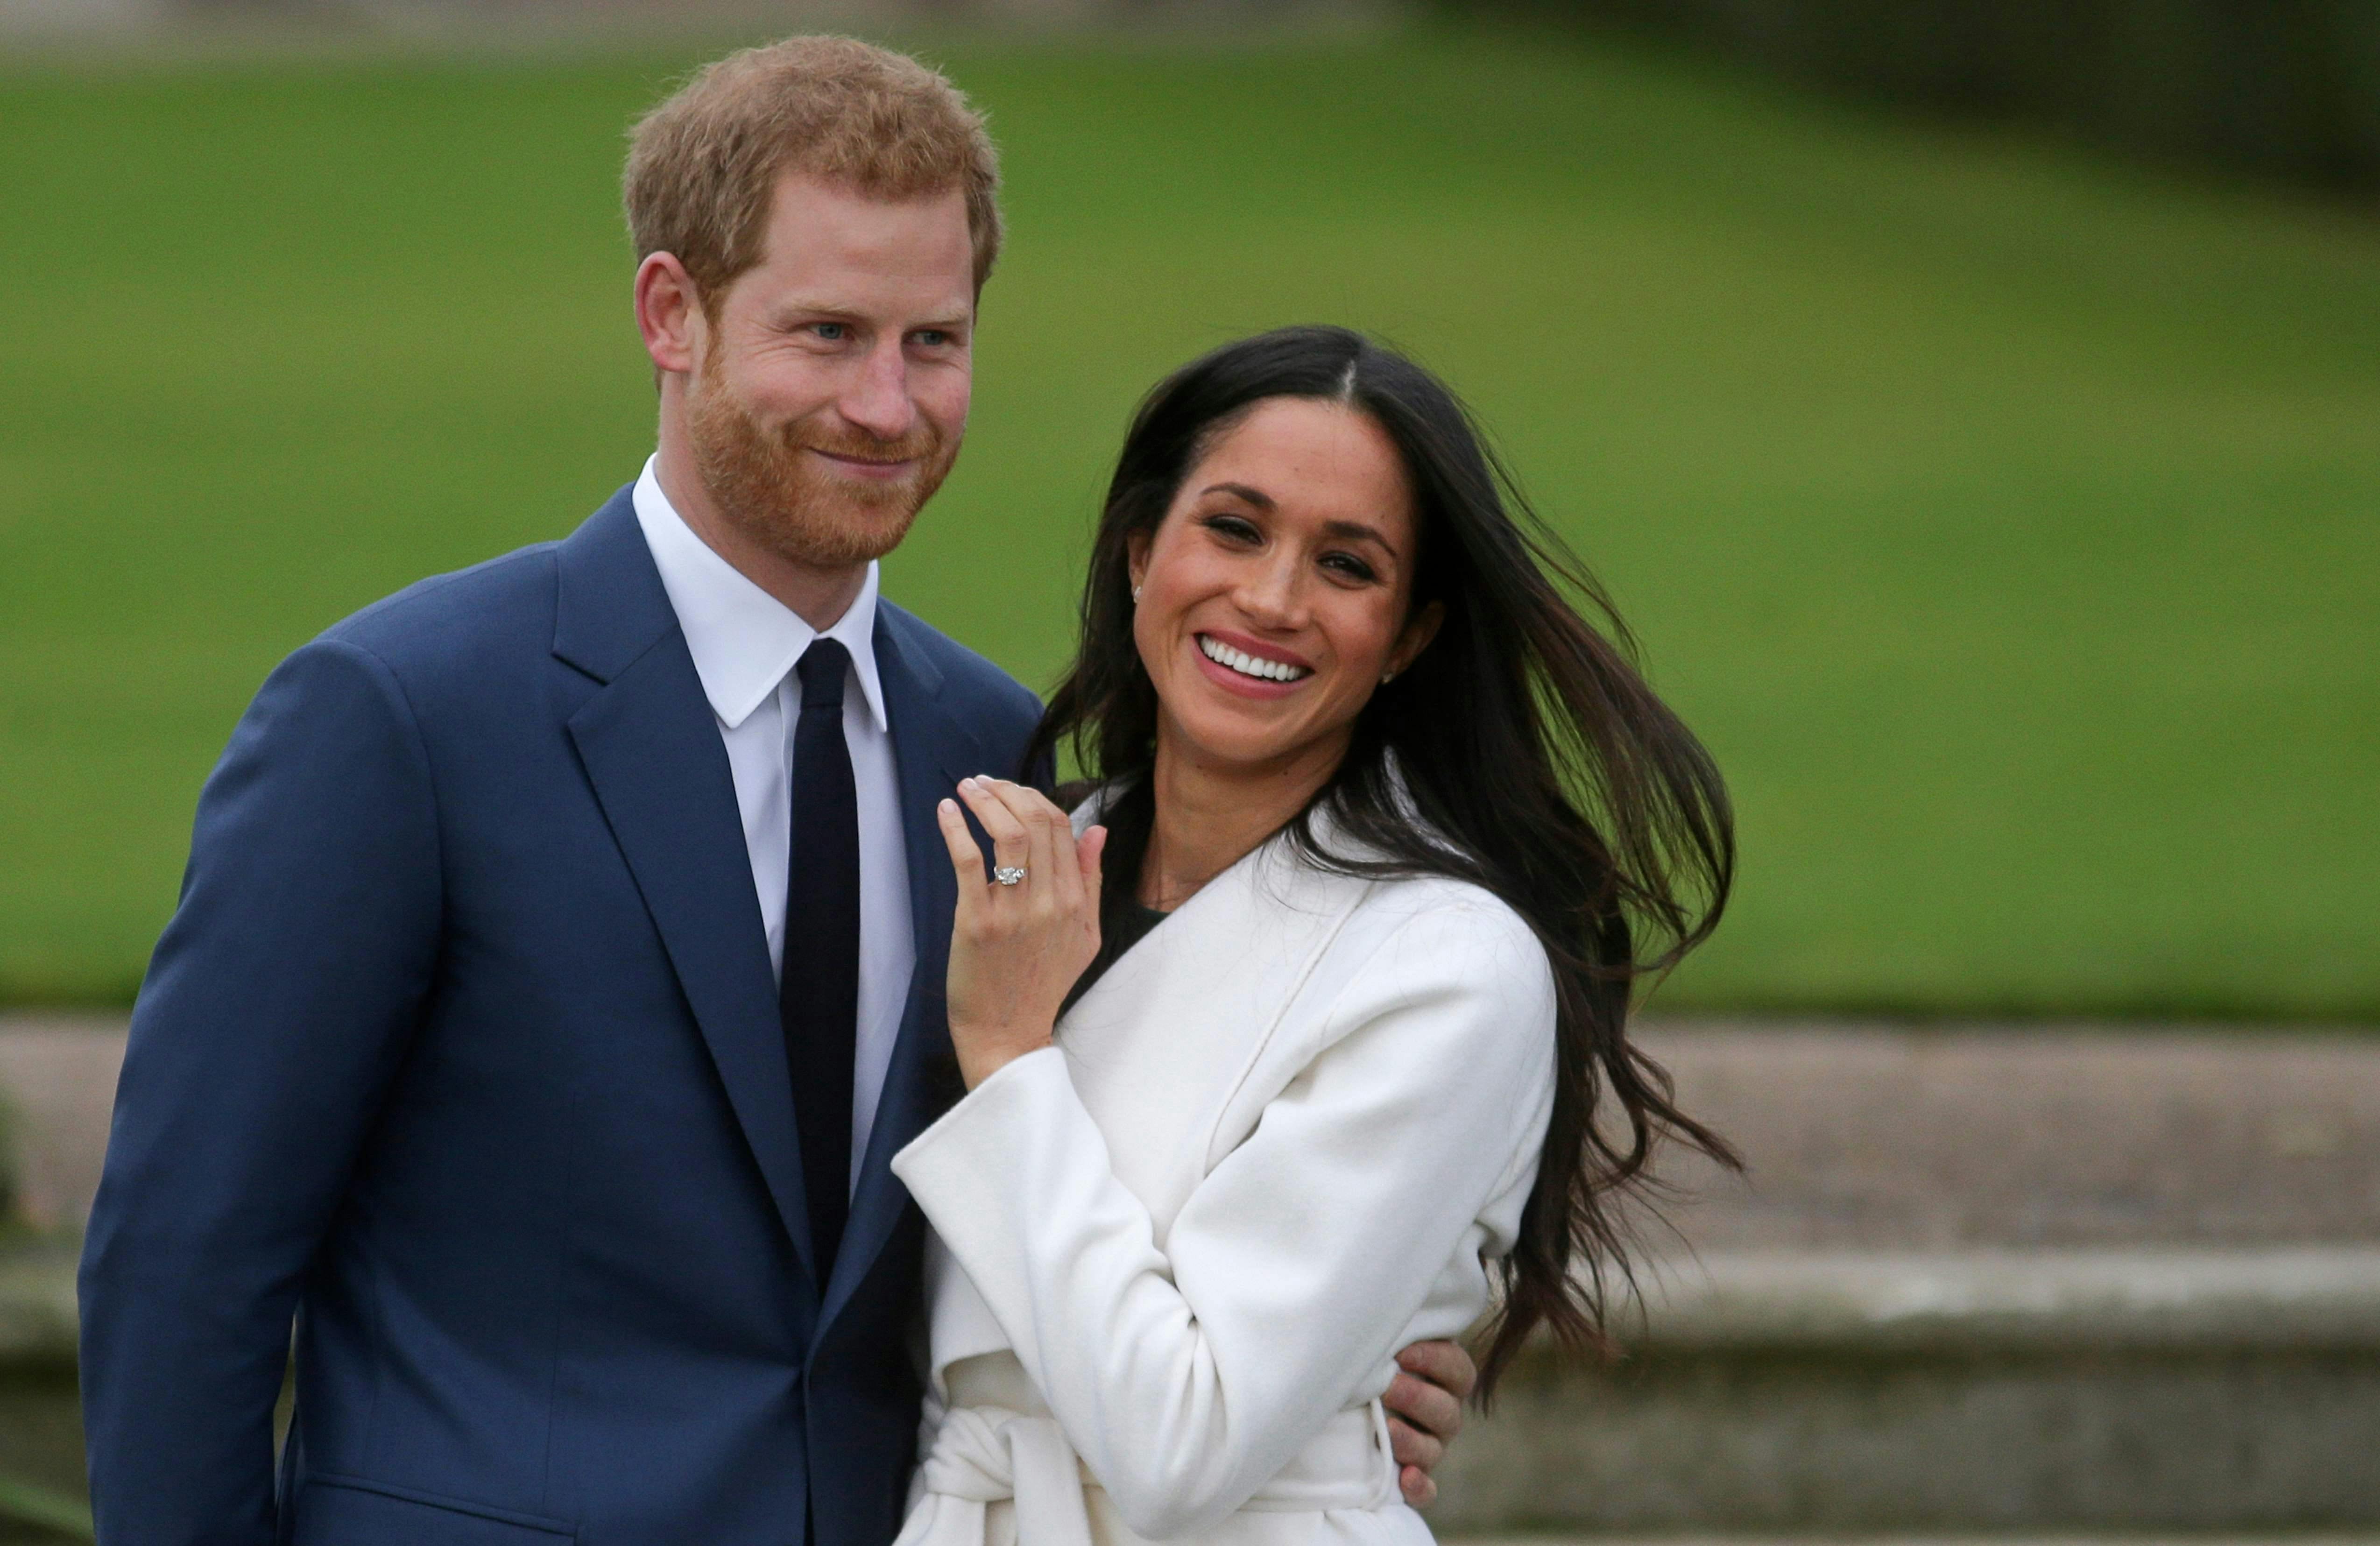 Prince Harry stands with his fiancée US actress Meghan Markle